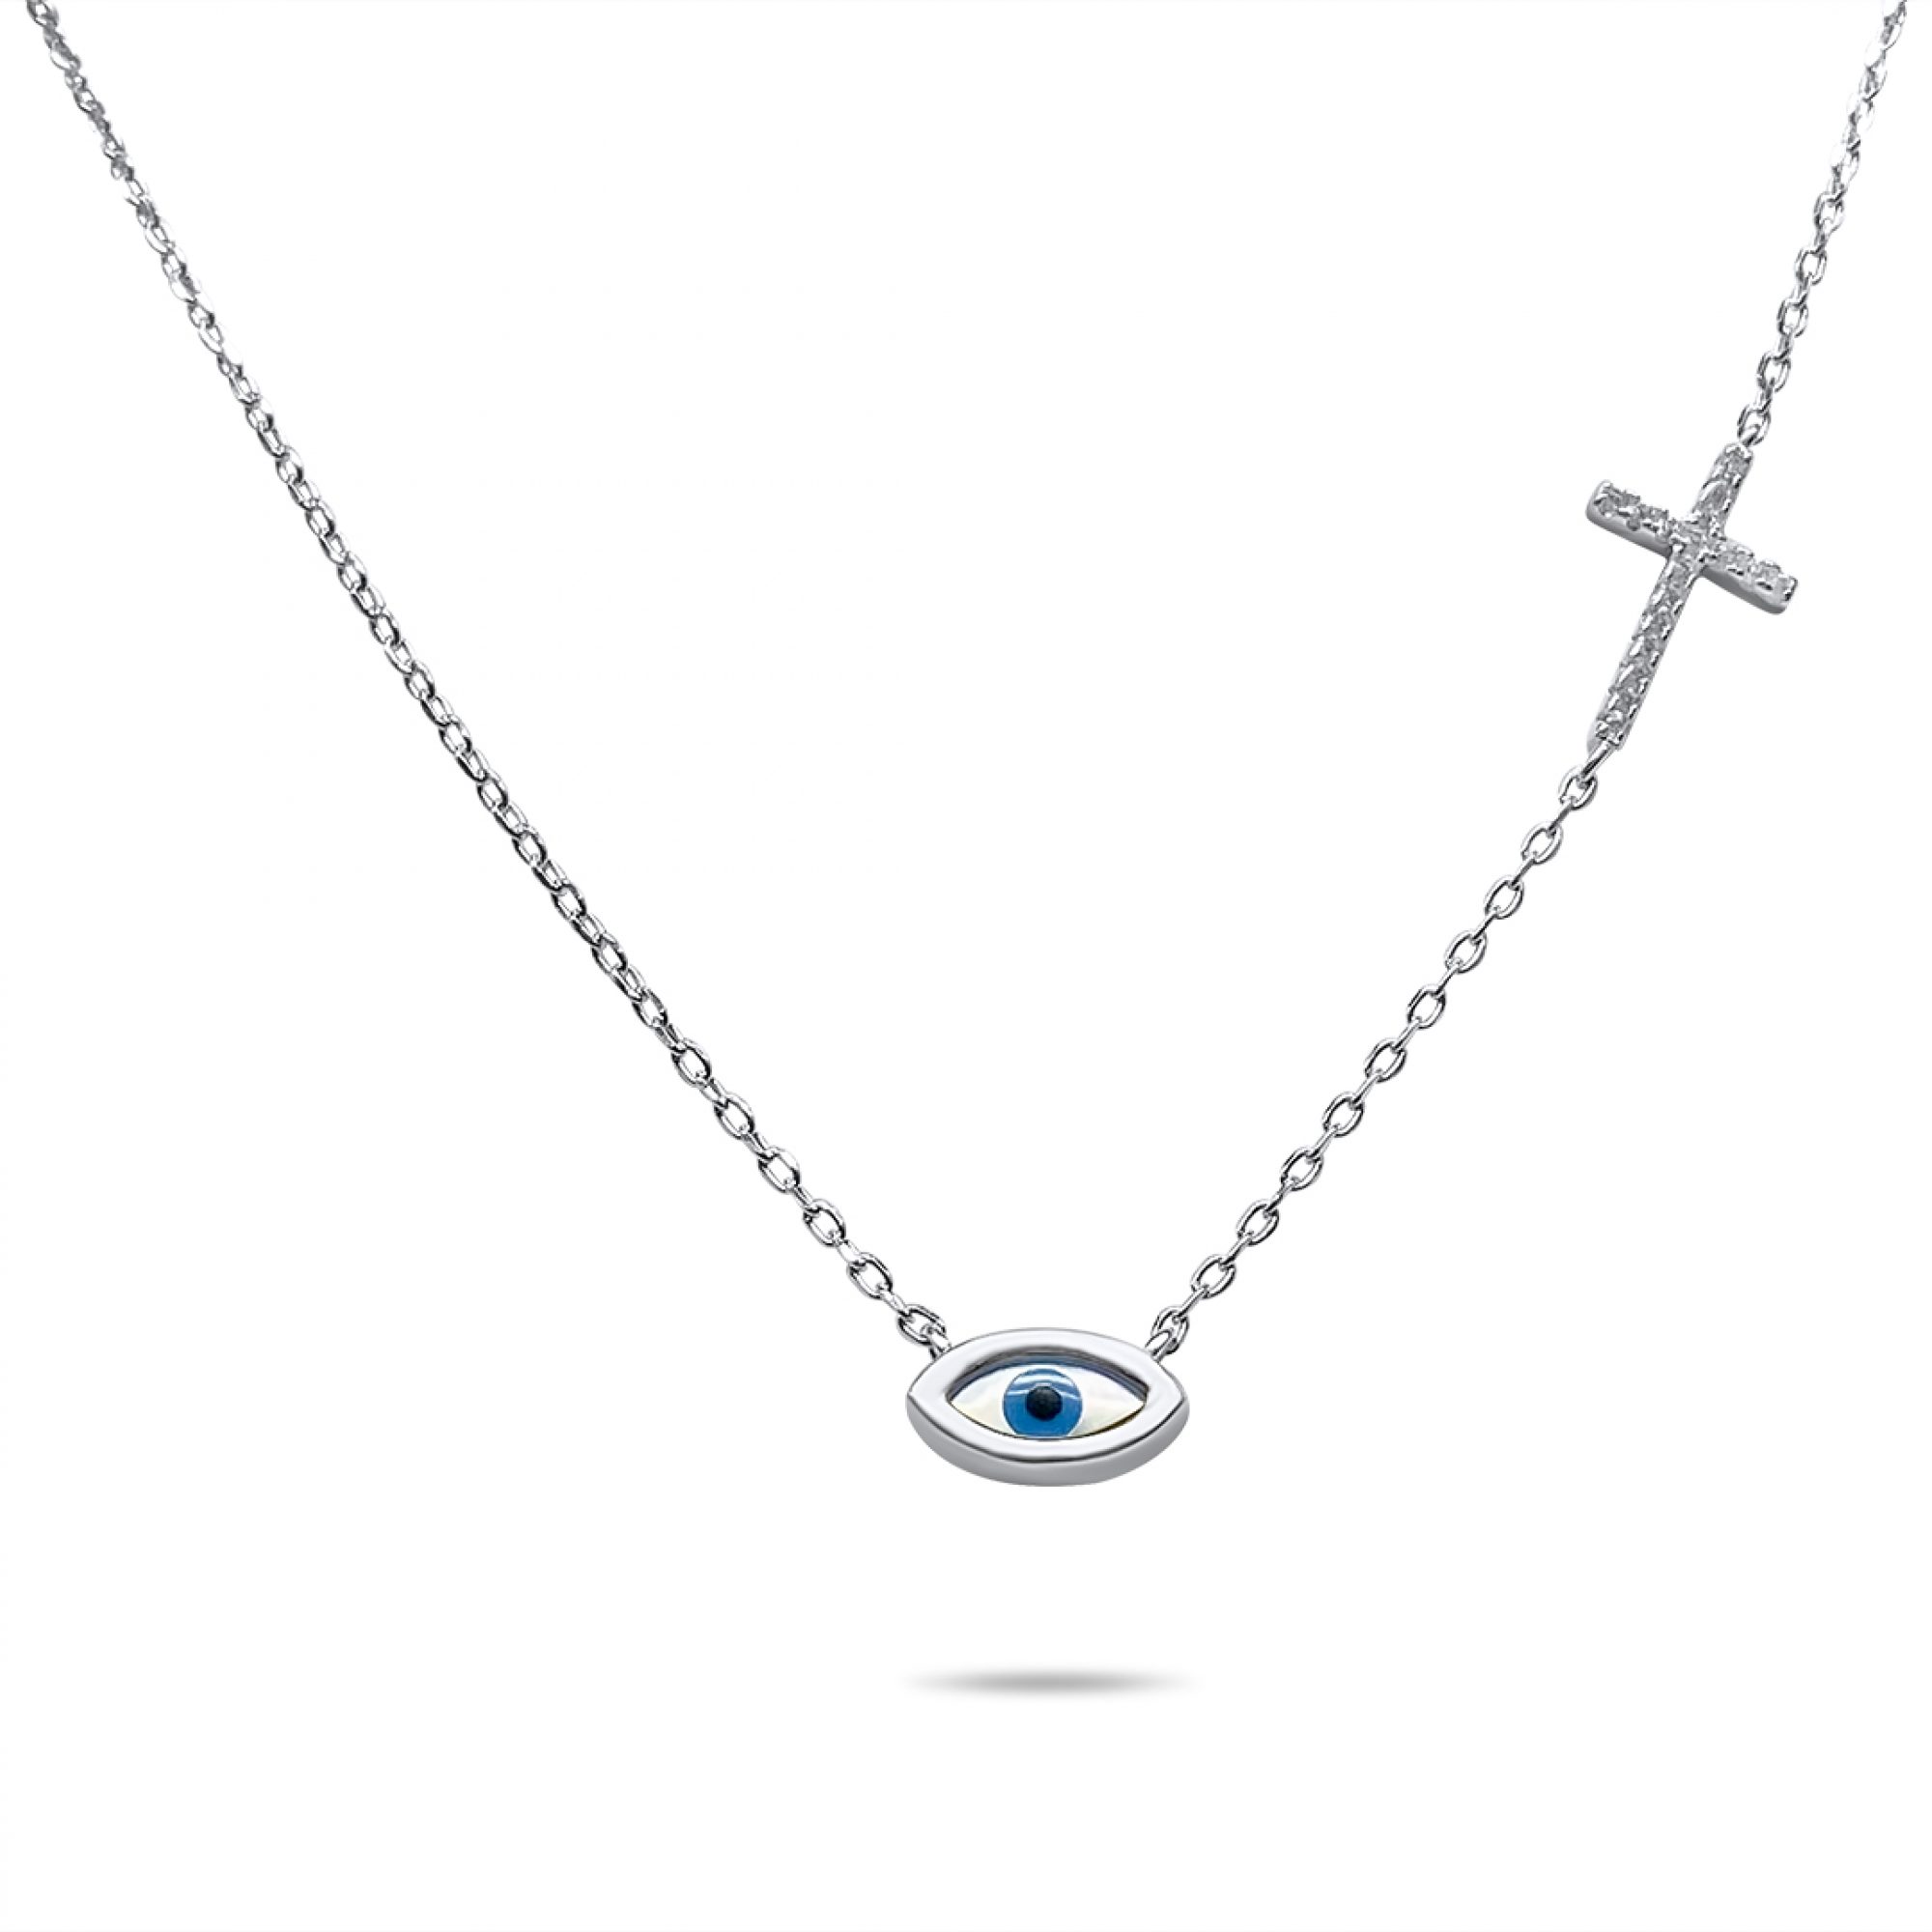 Eye necklace with mother of pearl